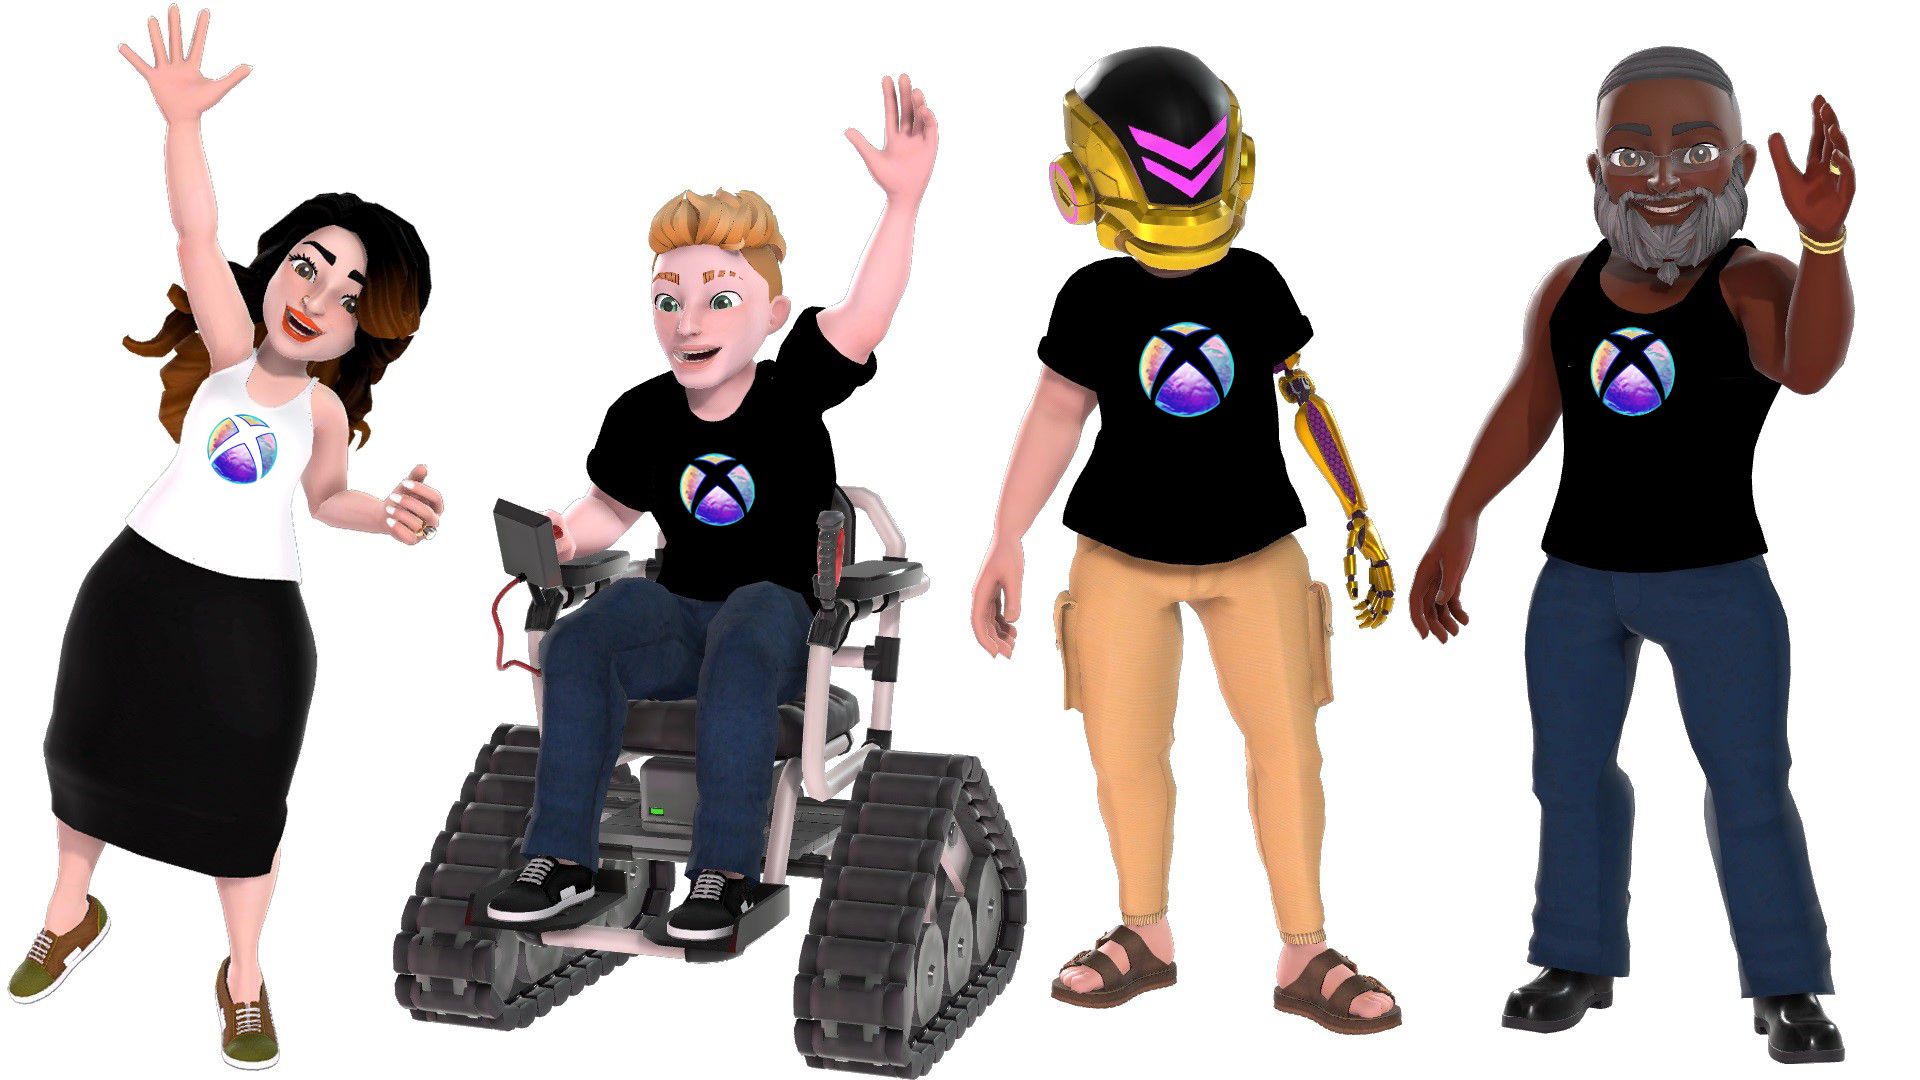 Four avatar characters displaying the Xbox International Women’s Day logo redesign on their tops which features the Xbox sphere with purple, pink, yellow, and green and a dreamy, water-like texture.